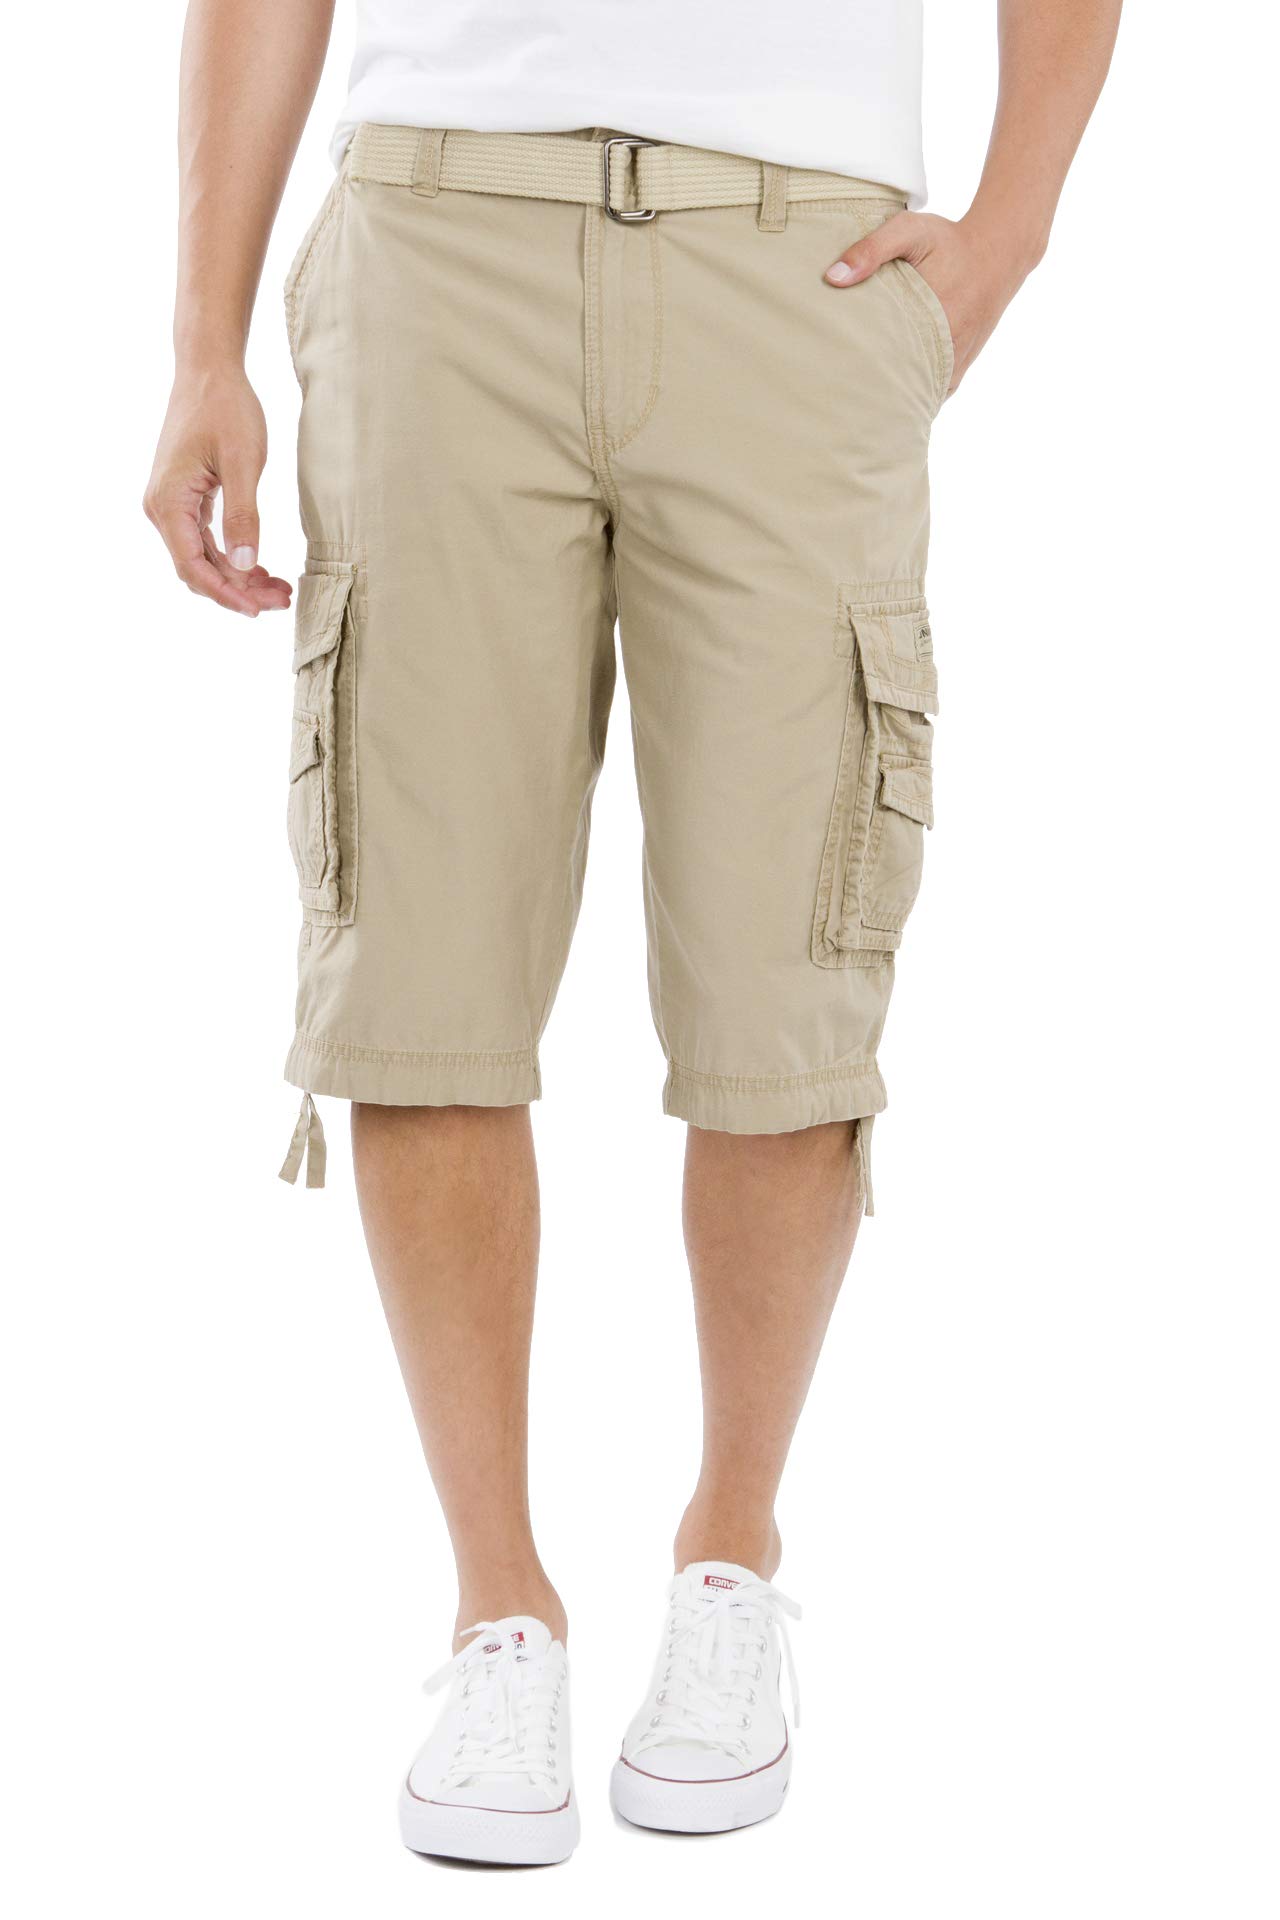 Unionbay Men's Cordova Belted Messenger Cargo Short - Reg and Big and Tall Sizes